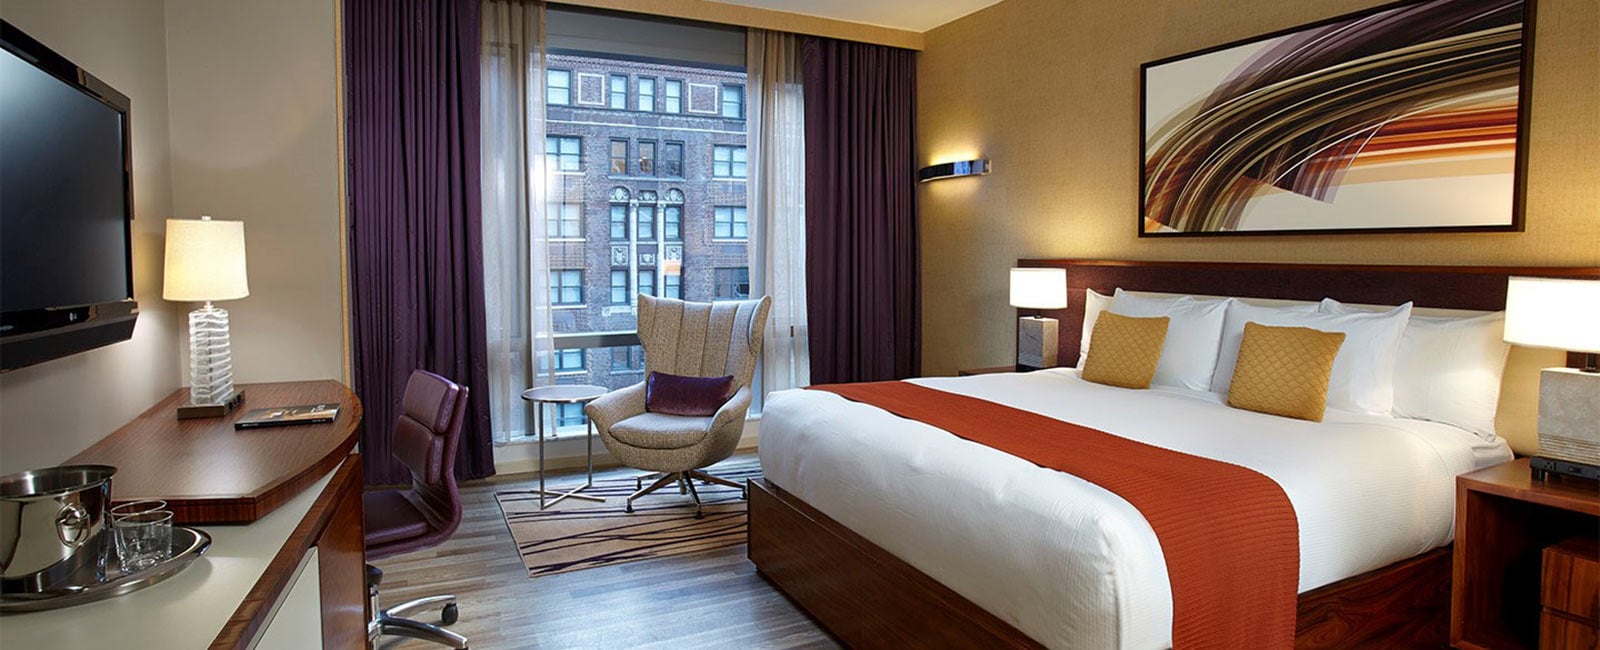 Bedroom at West 57th Street Resort by Hilton Club in New York